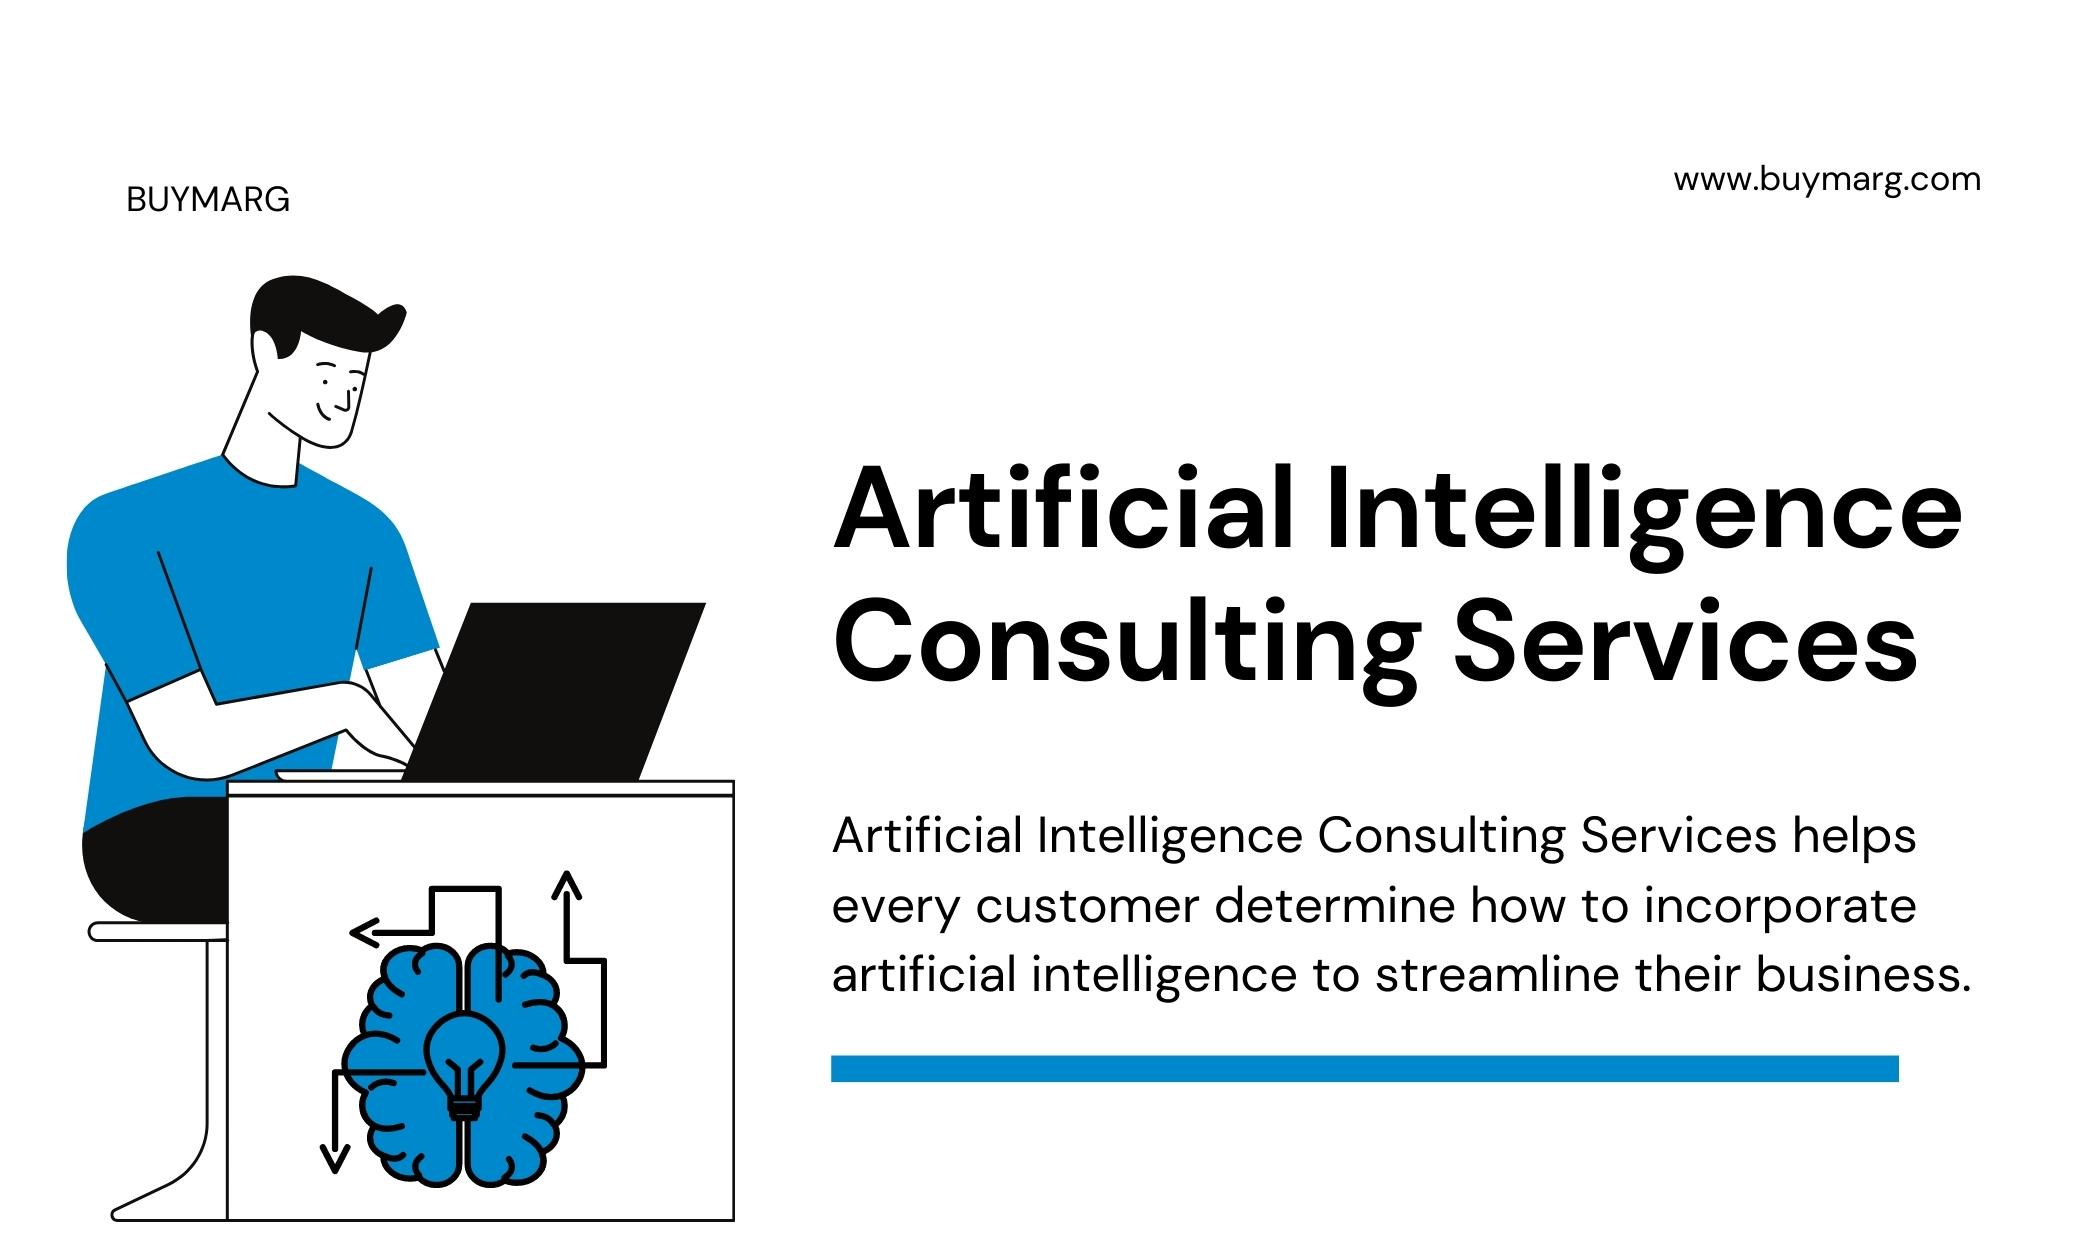 Artificial Intelligence Consulting Services